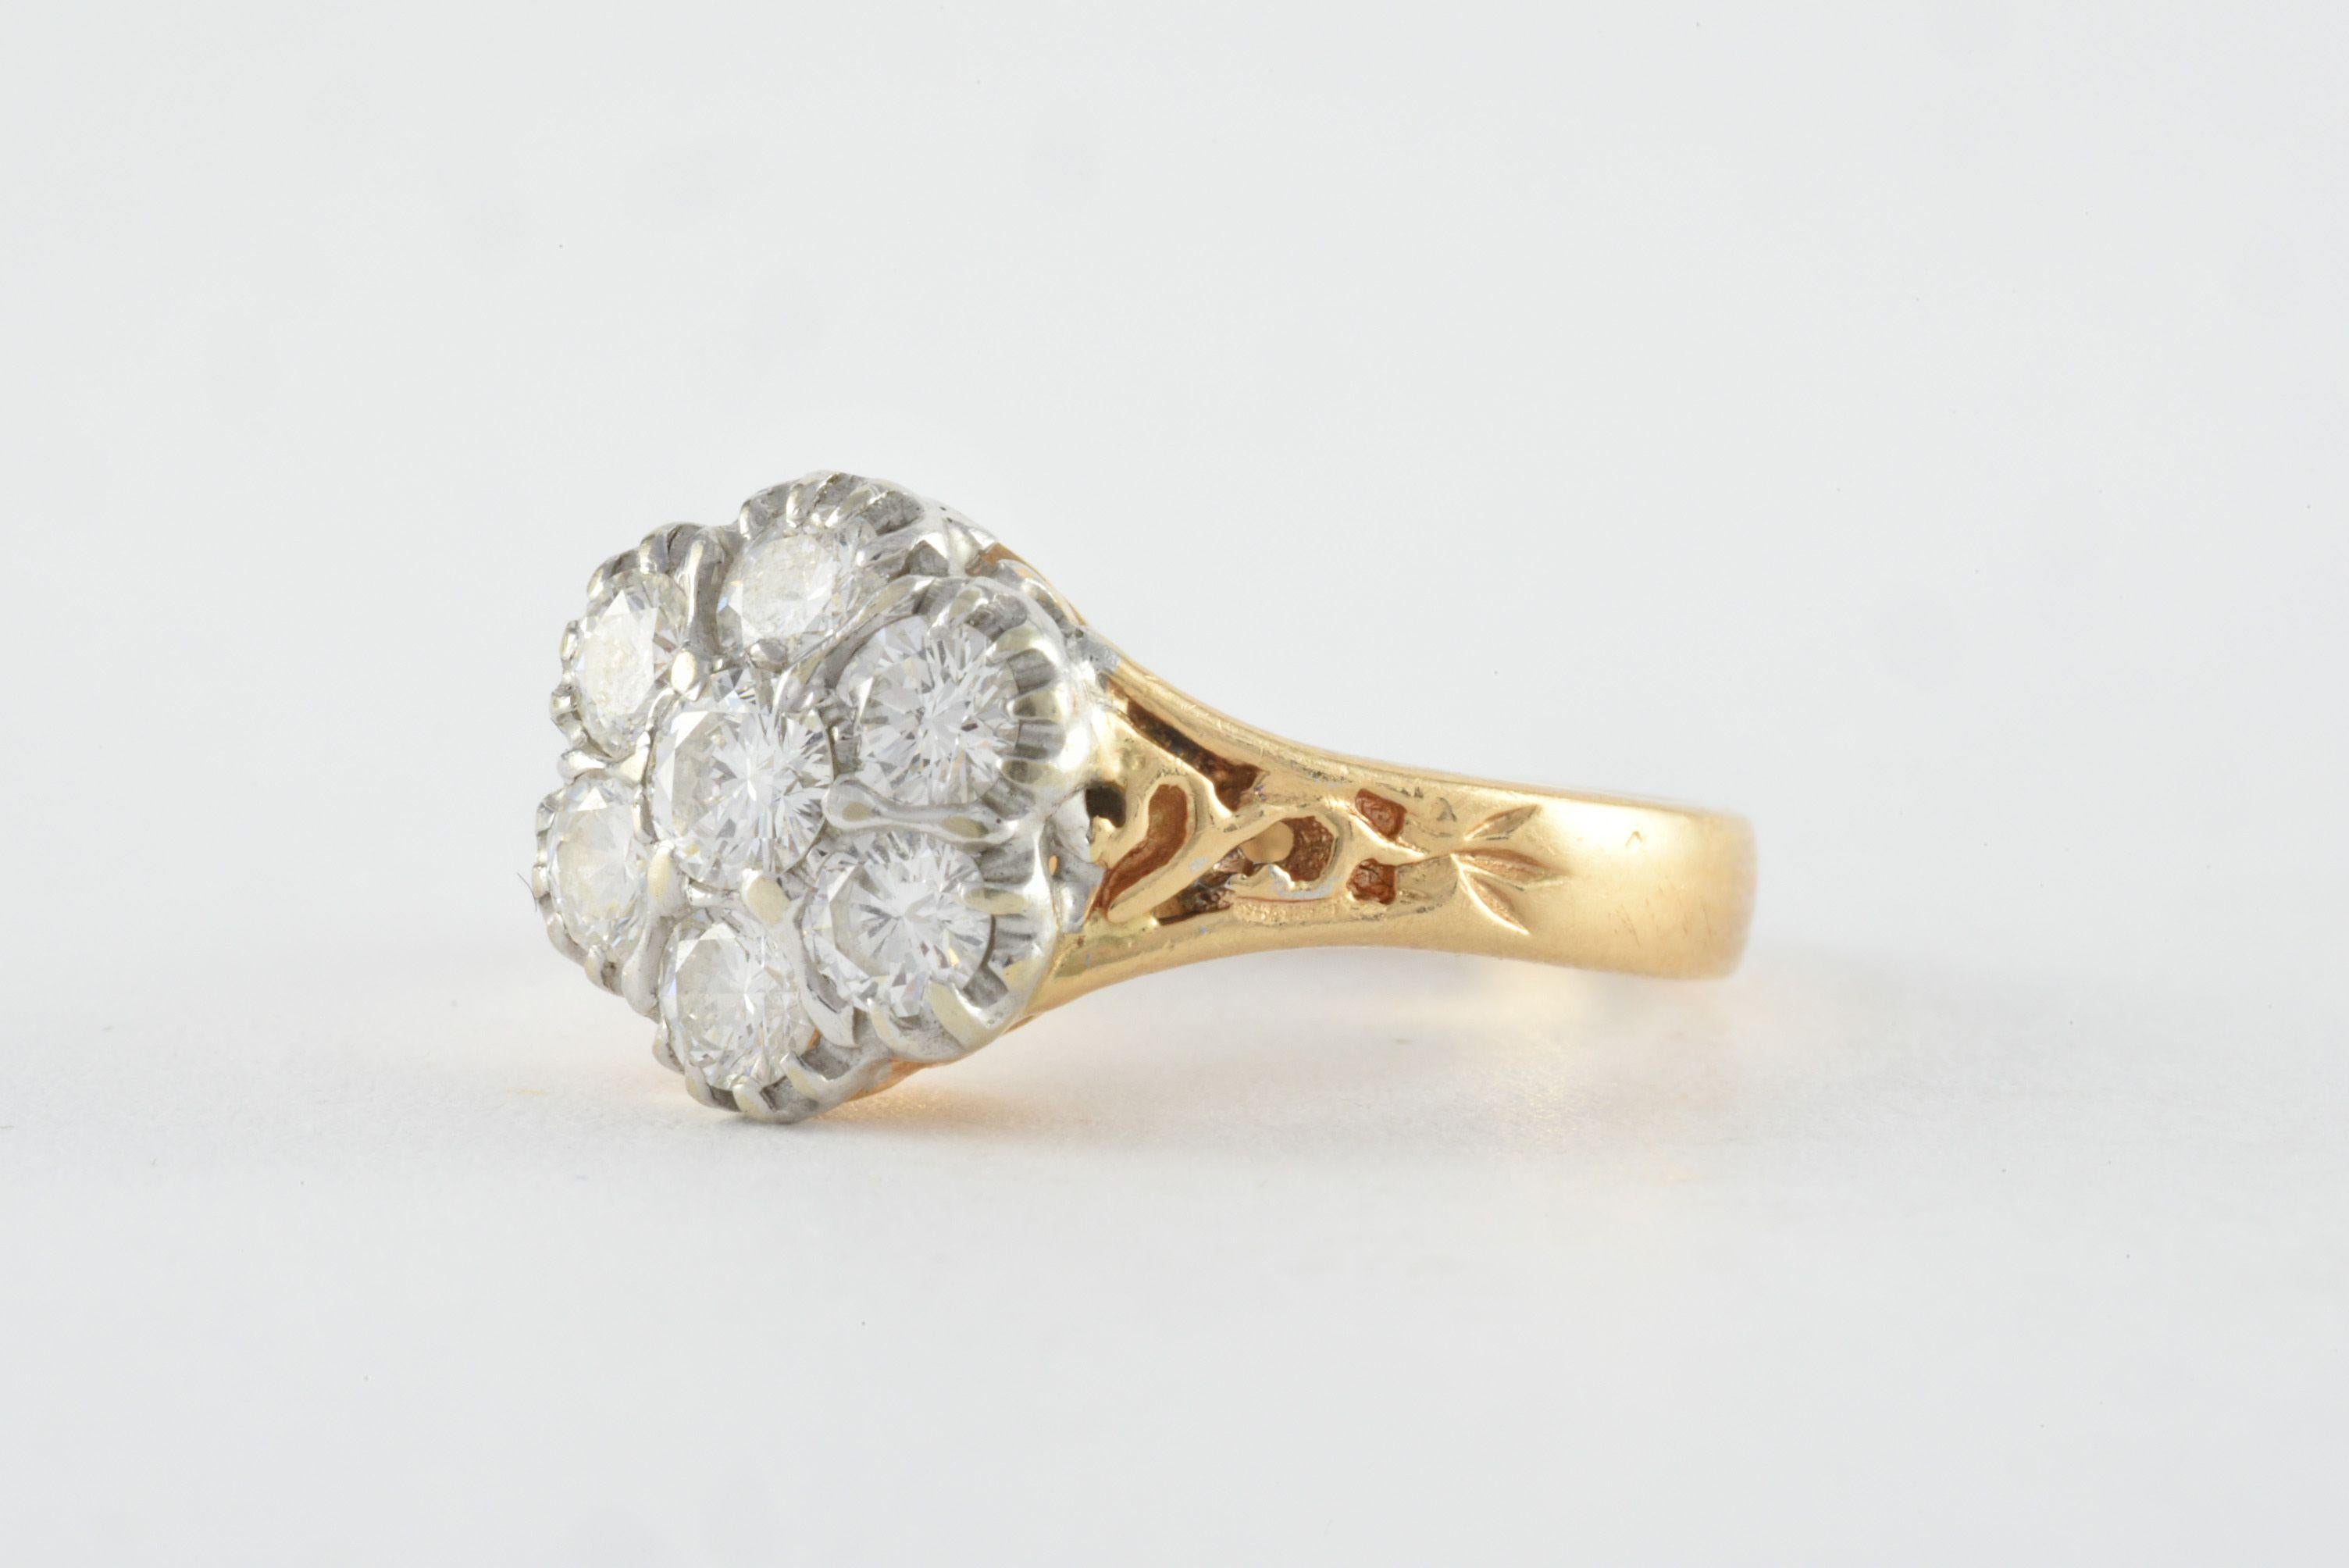 Seven bright white round brilliant-cut diamonds totaling approximately 0.70 carats, G color, VS clarity set in a floral design adorn this vintage band crafted in 14kt yellow gold and embellished with decorative piercing. 